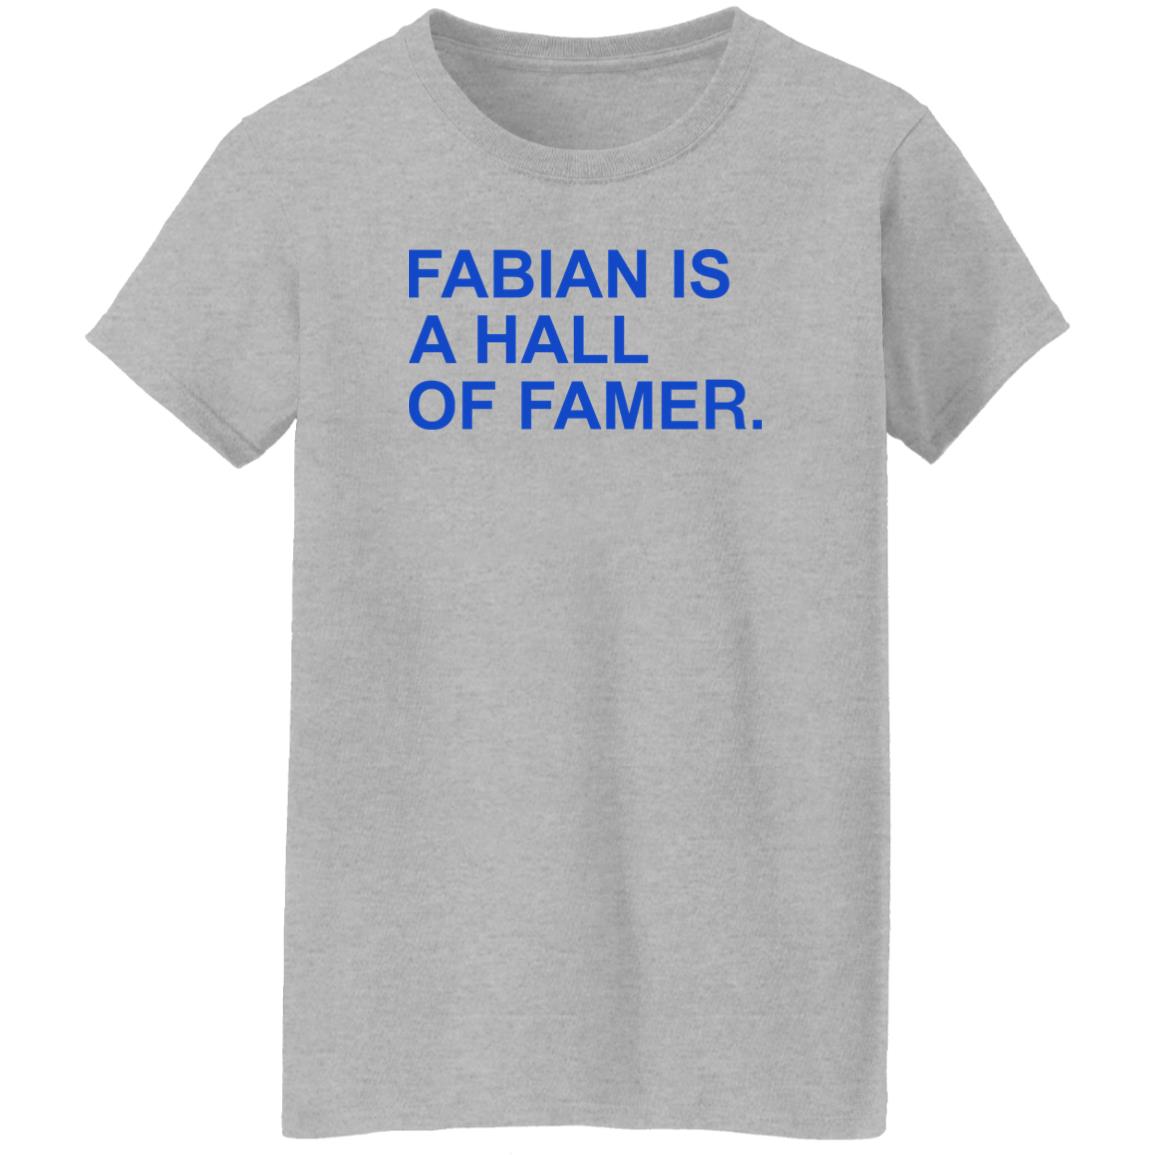 Fabian Is A Hall Of Famer Shirt Obvious Shirts Store